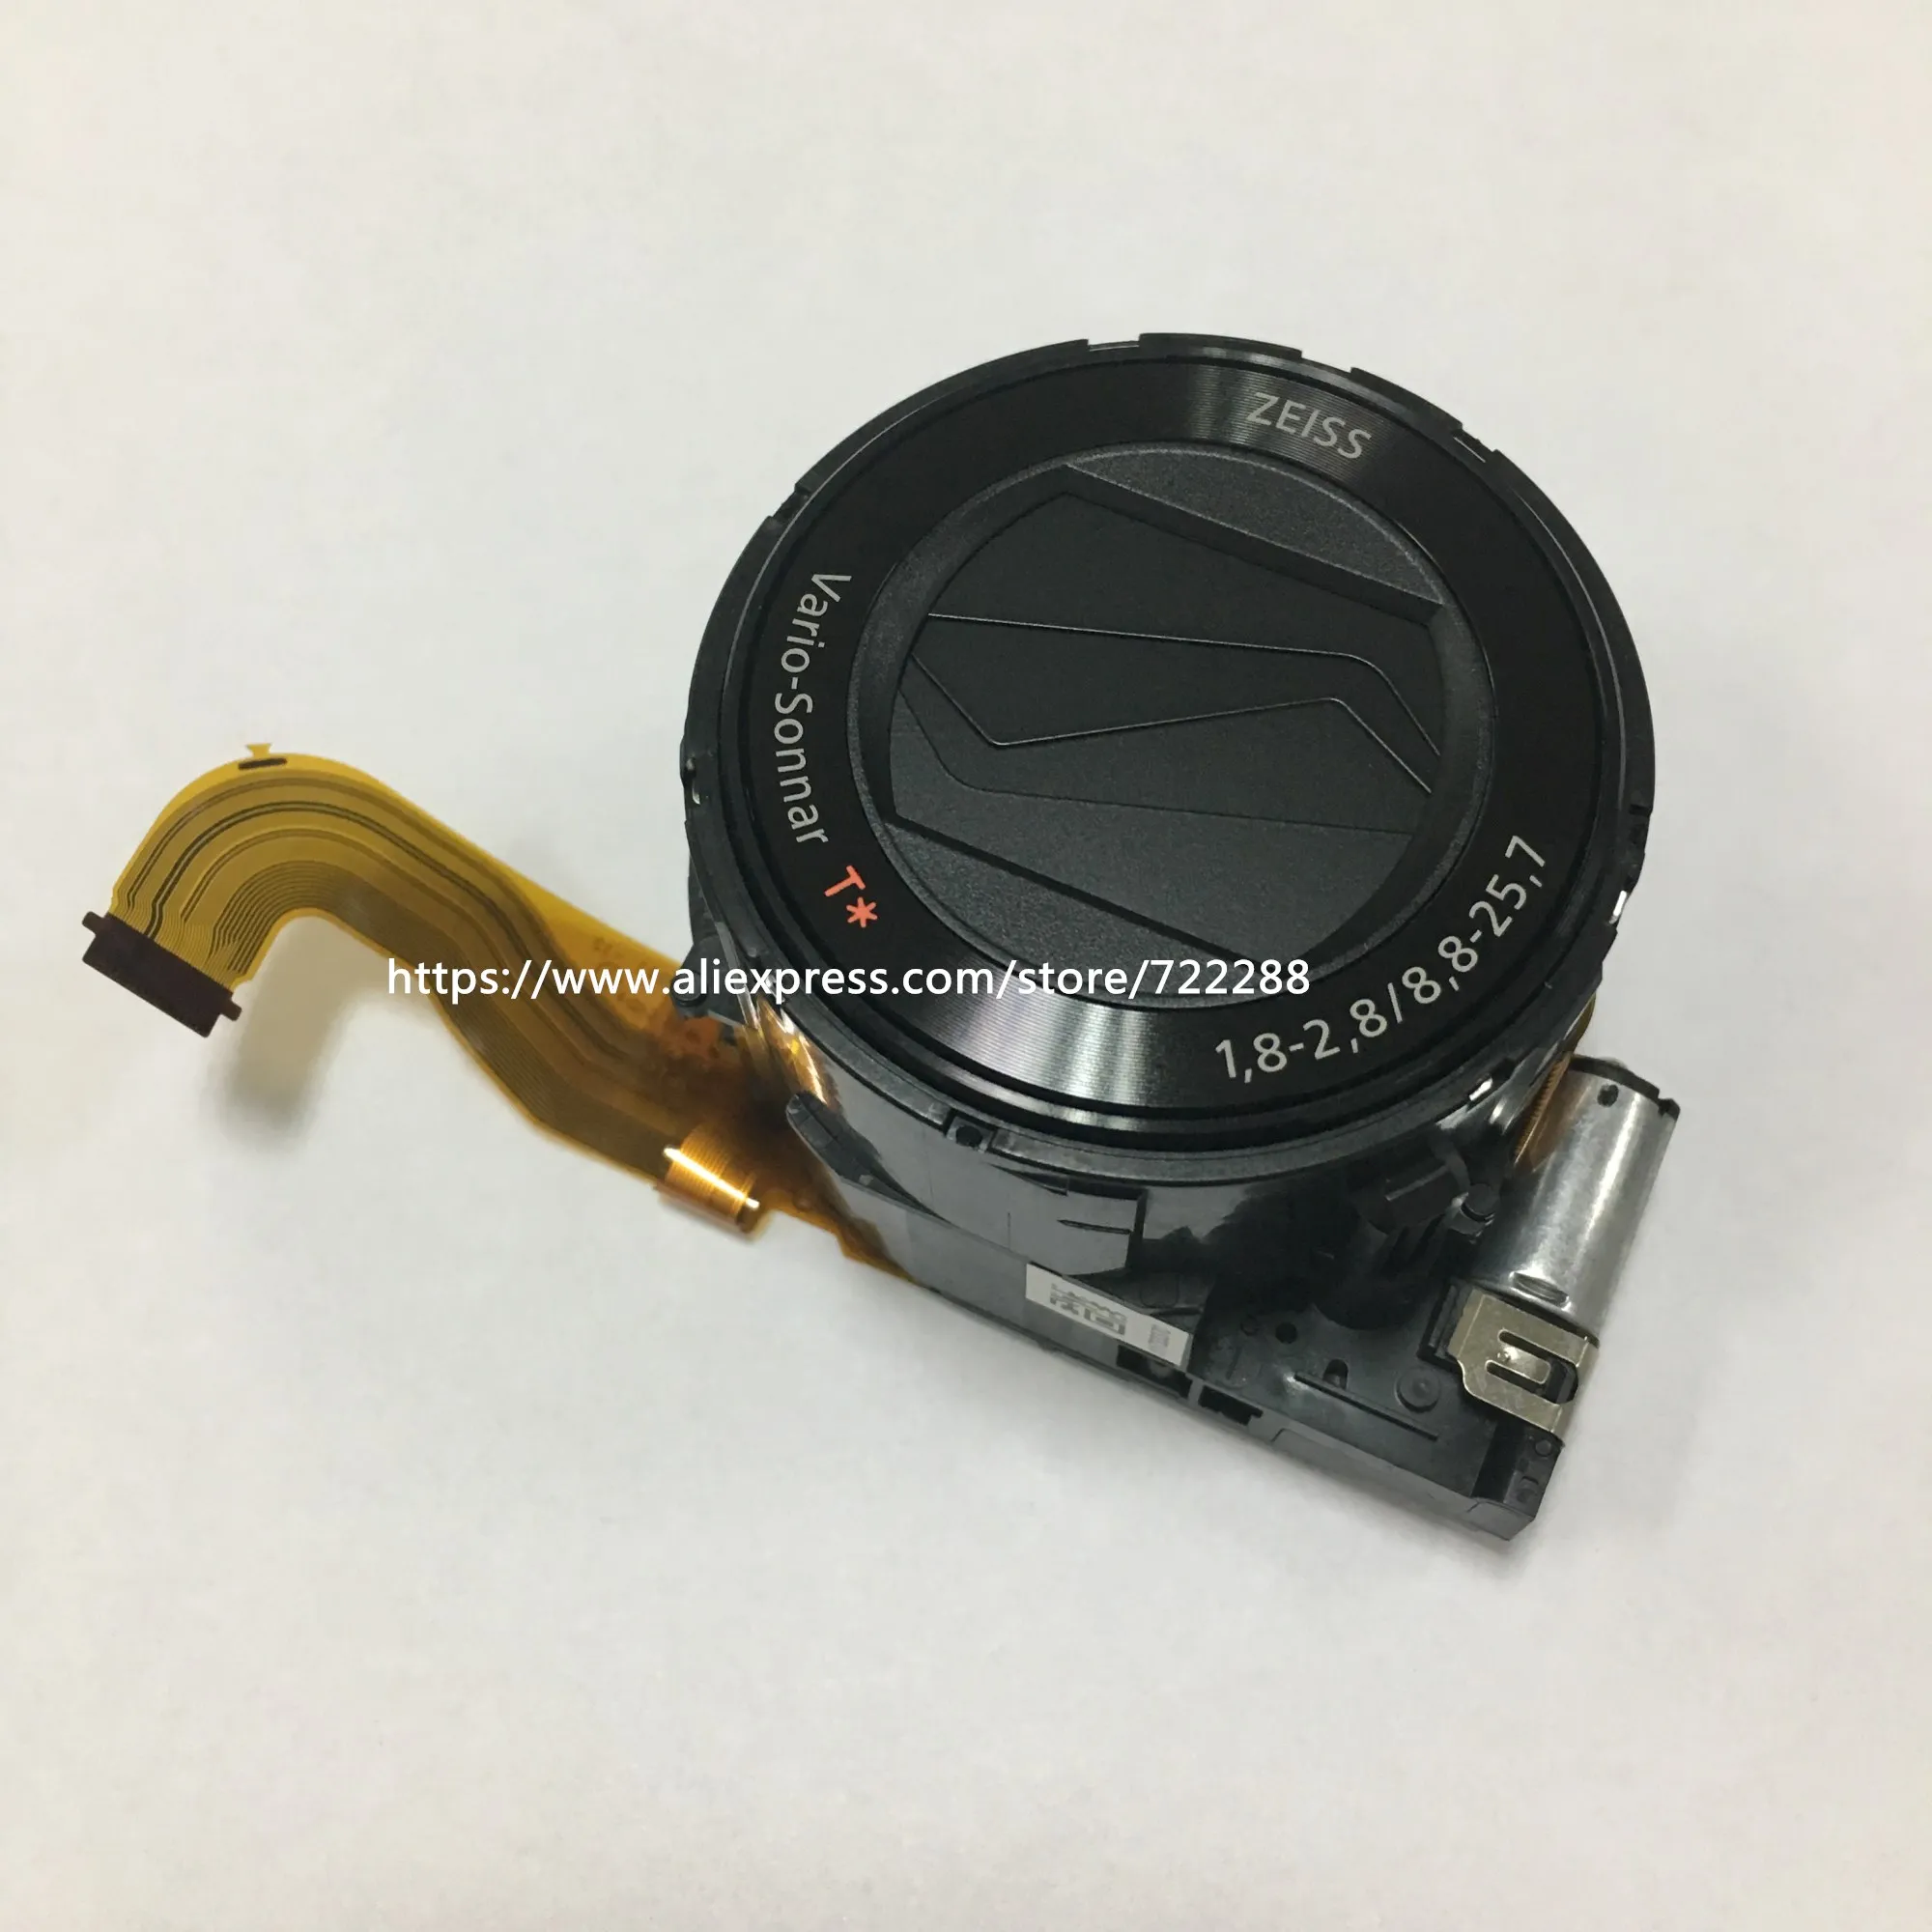 Repair Parts For Sony Cyber-shot Rx100 V Dsc-rx100m5 Mark 5 Zoom